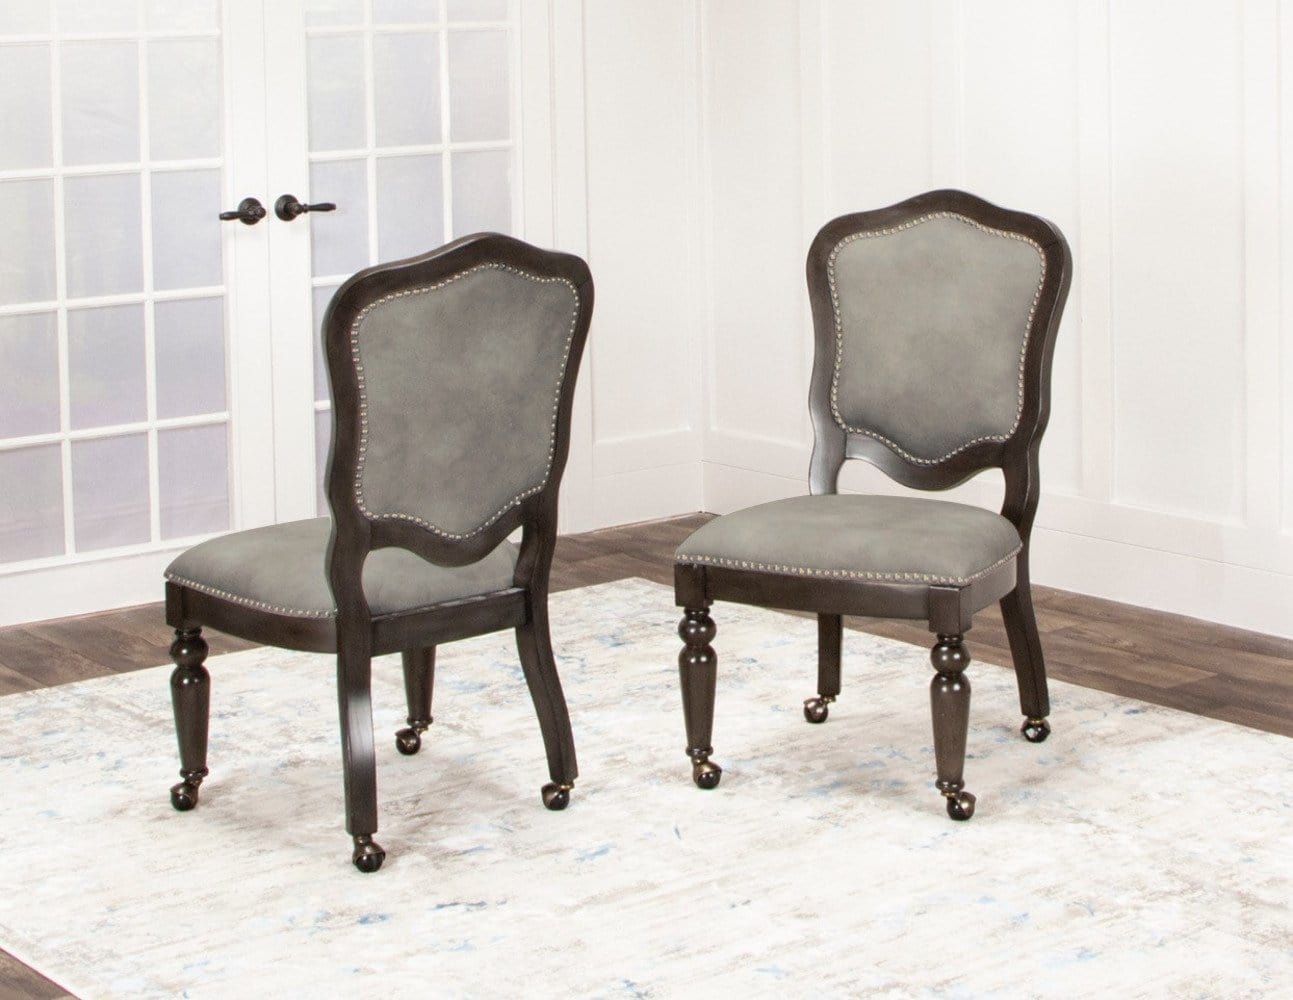 Comfortable padded chairs with casters. 